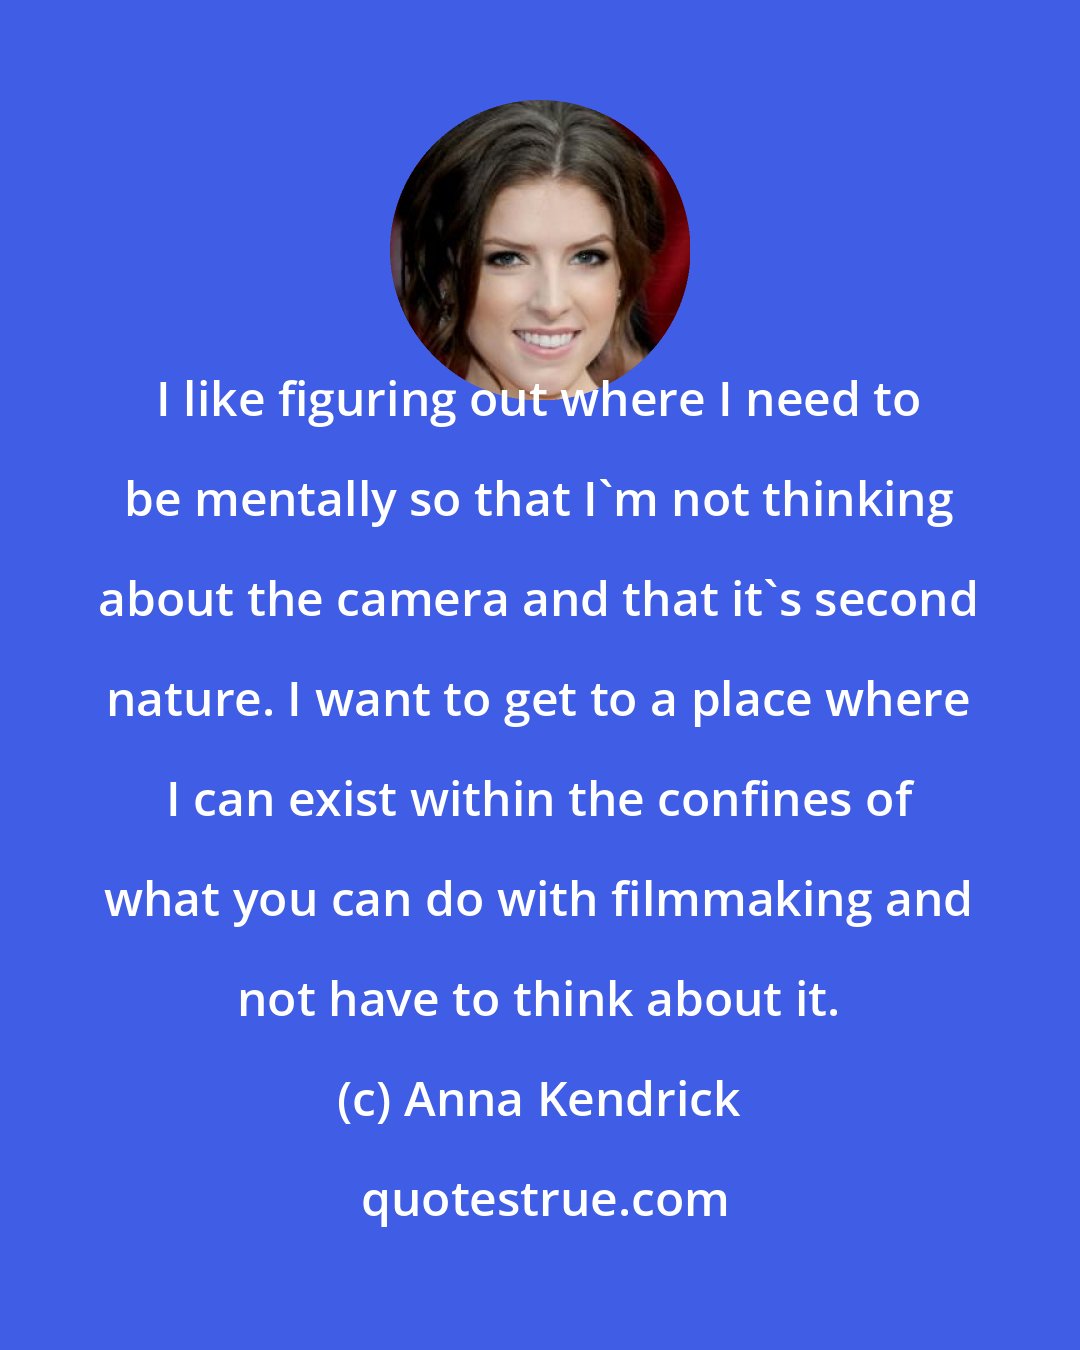 Anna Kendrick: I like figuring out where I need to be mentally so that I'm not thinking about the camera and that it's second nature. I want to get to a place where I can exist within the confines of what you can do with filmmaking and not have to think about it.